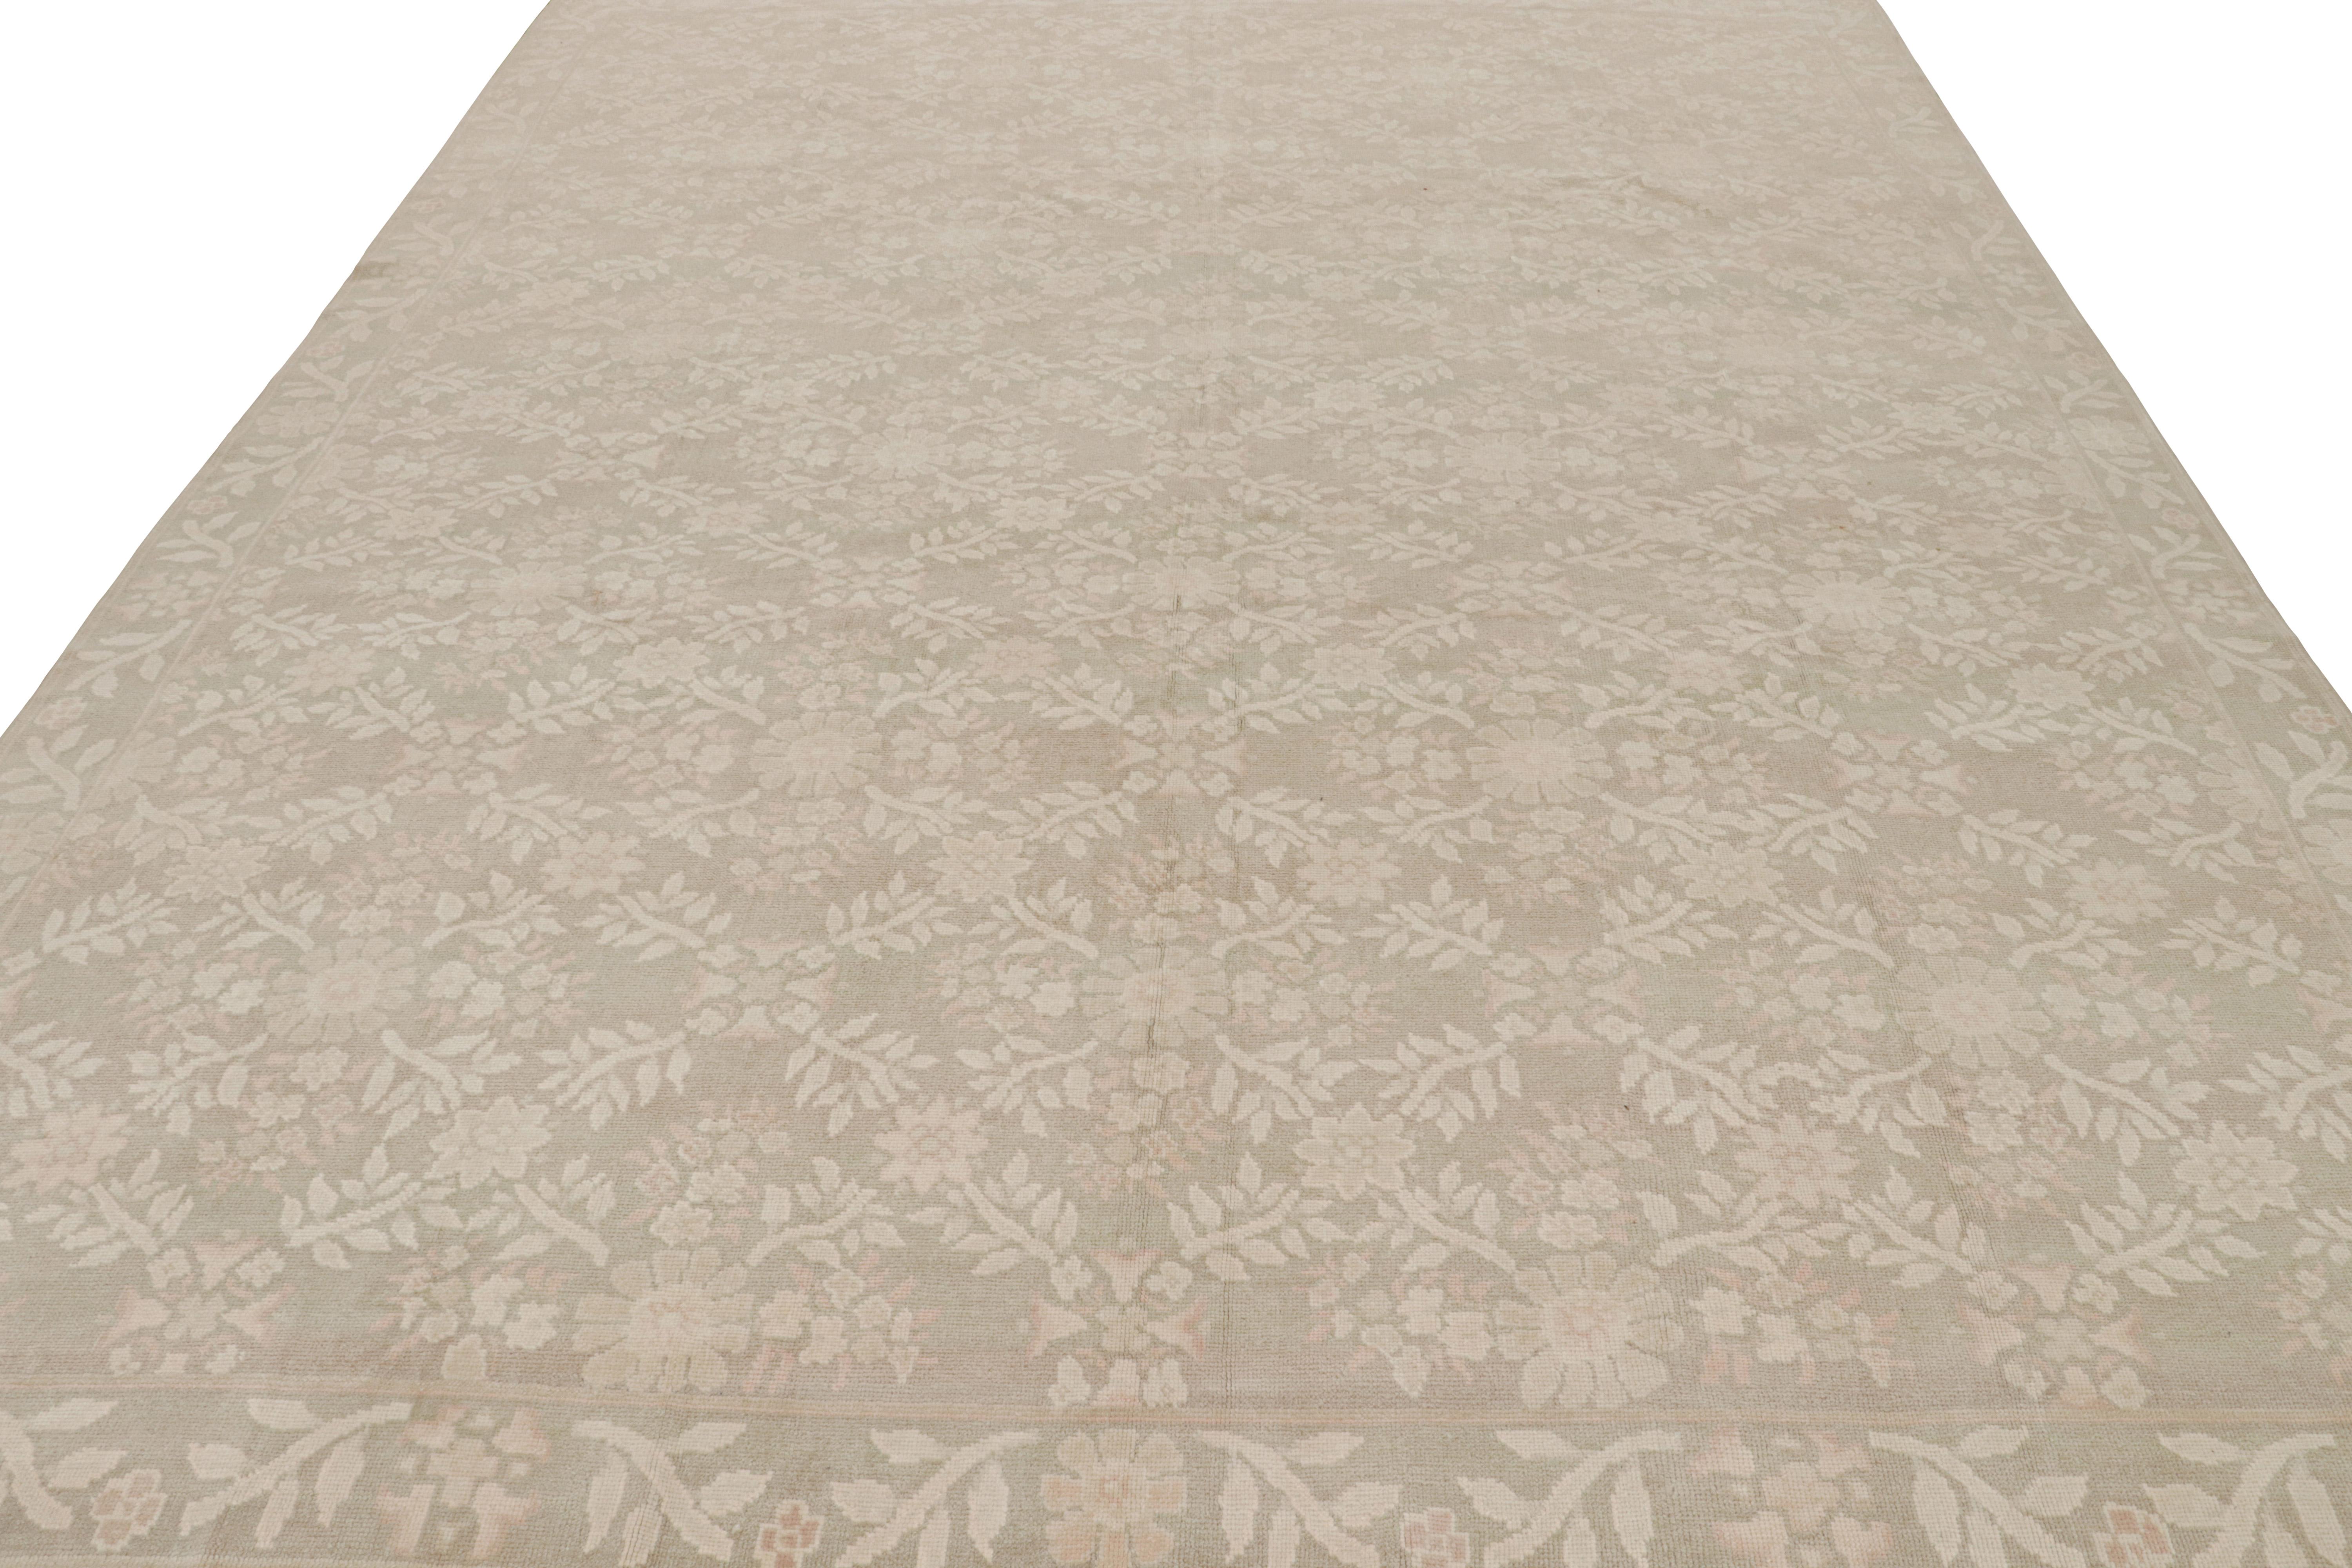 Chinese Rug & Kilim’s Contemporary European Style Rug in Beige with Floral Patterns  For Sale